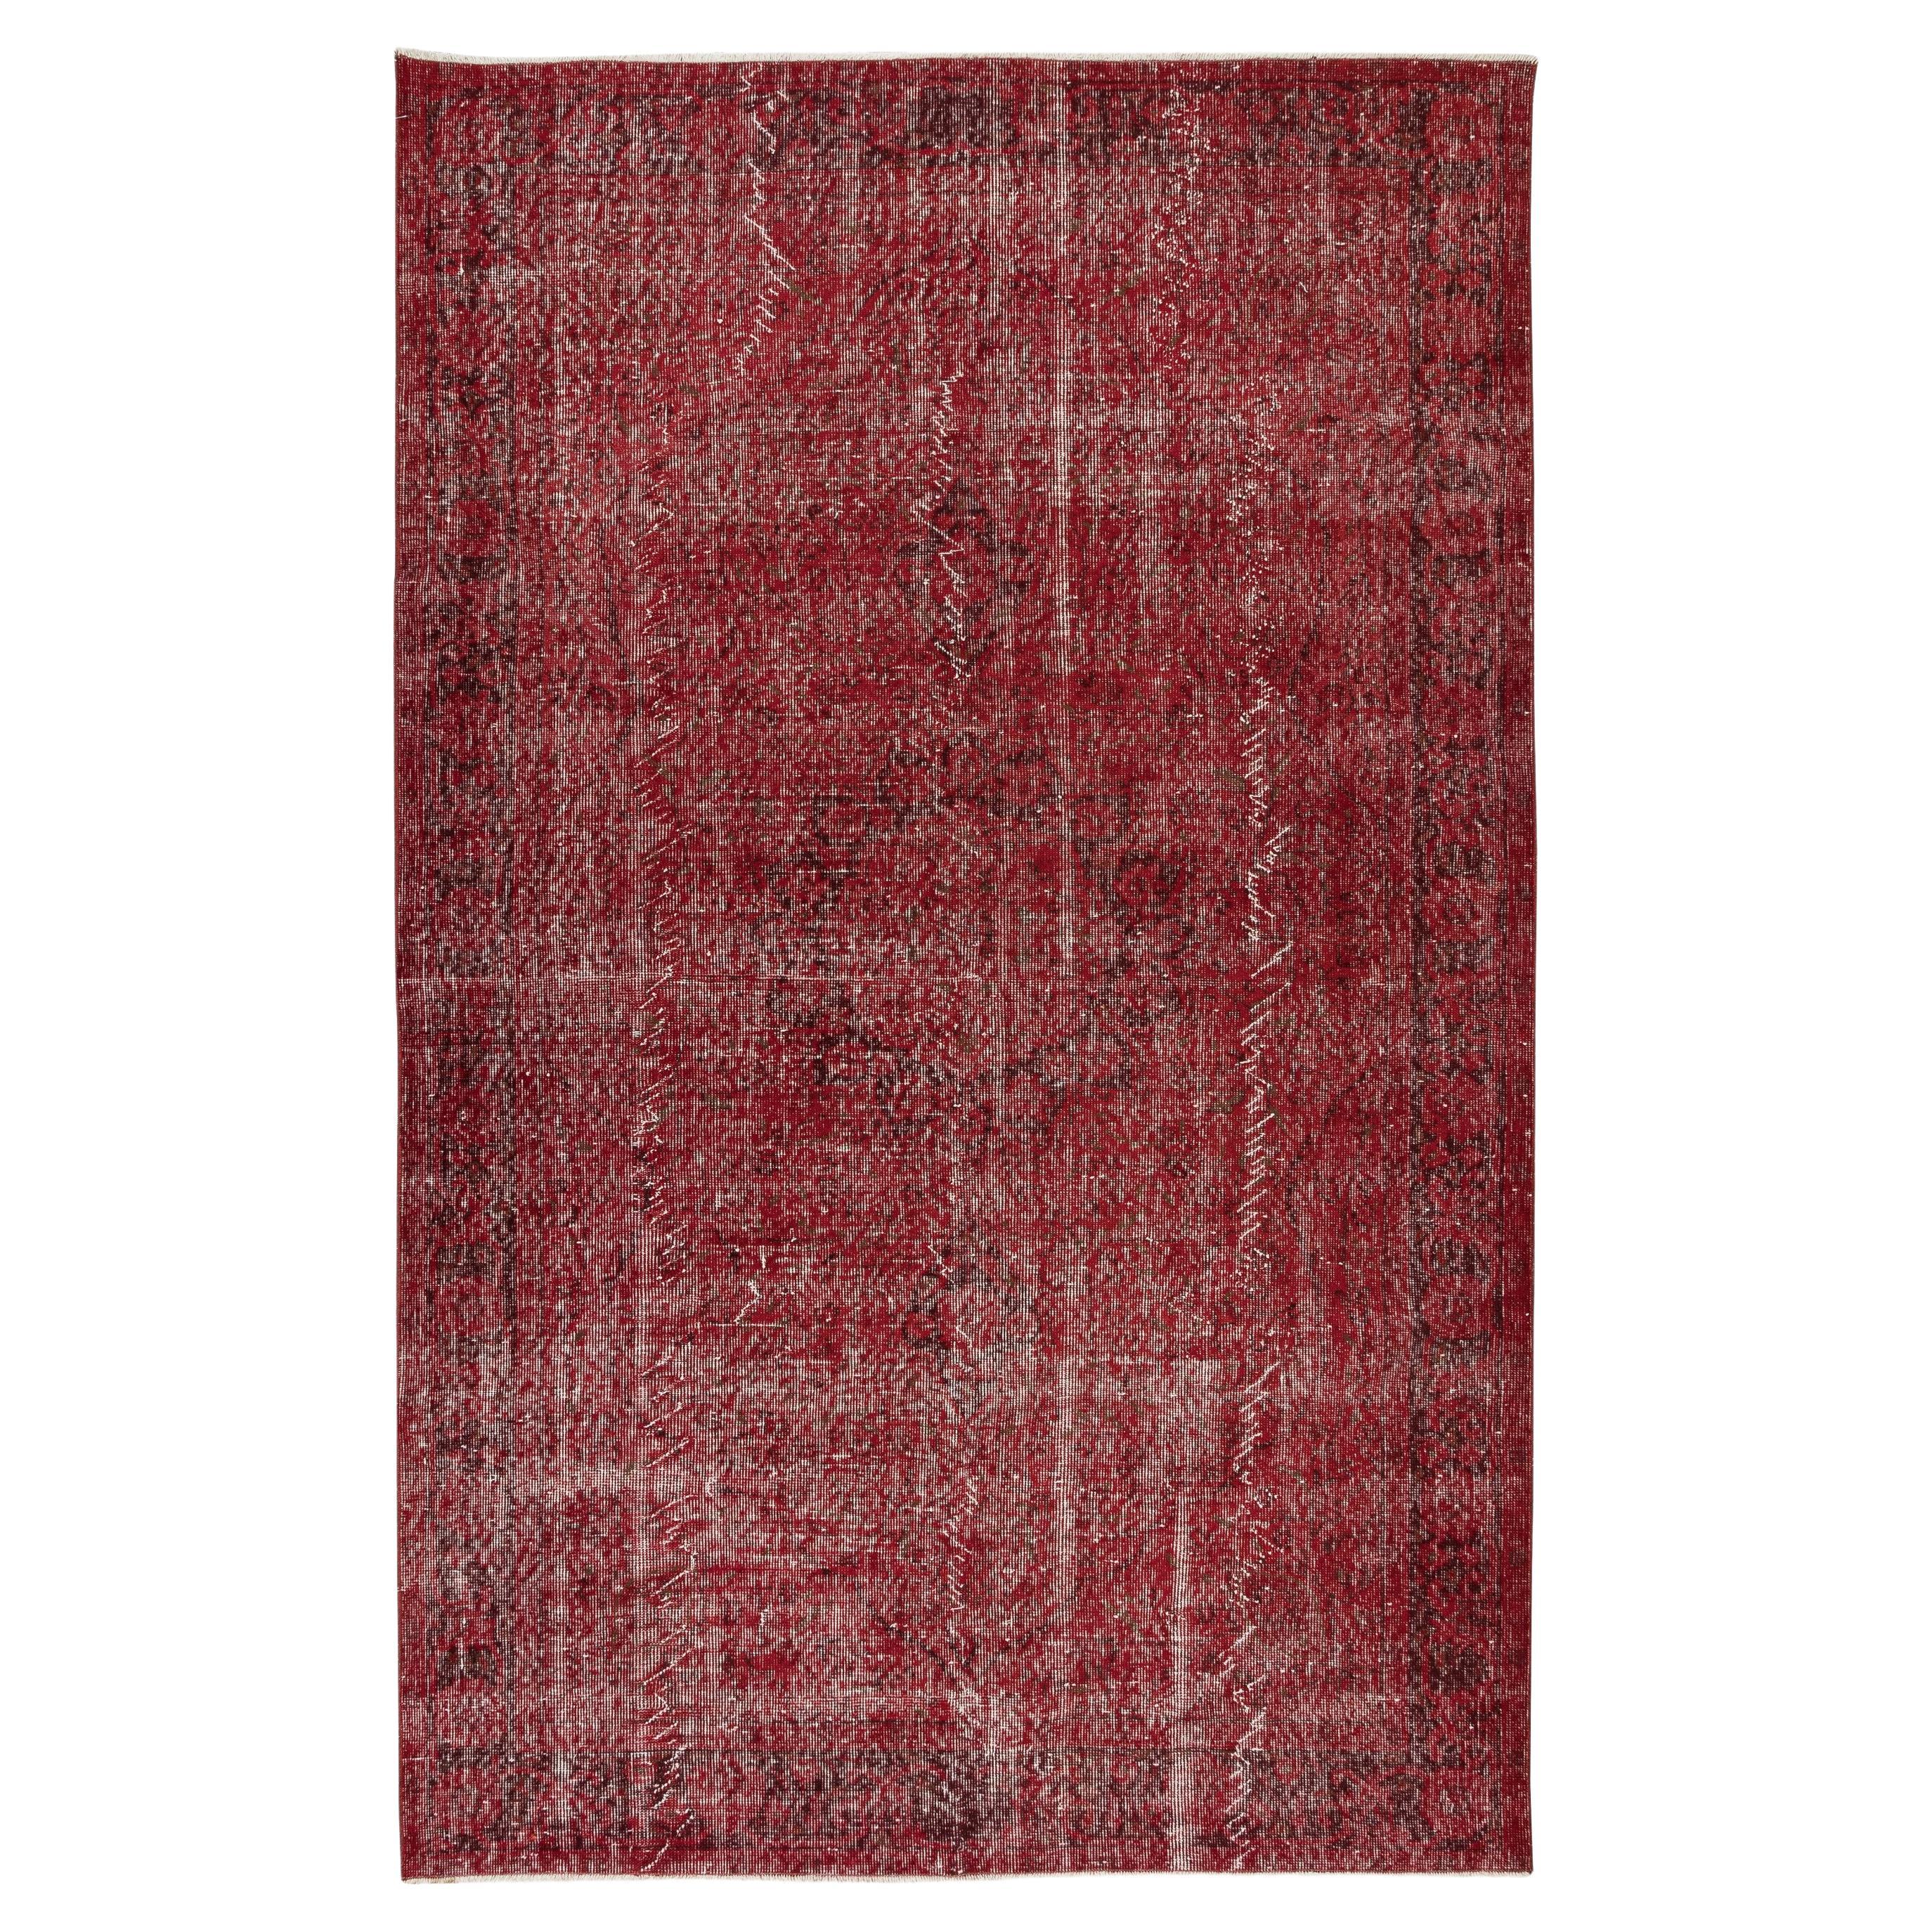 5.8x9 Ft Turkish Vintage Rug Overdyed in Burgundy Red, Great 4 Modern Interiors For Sale